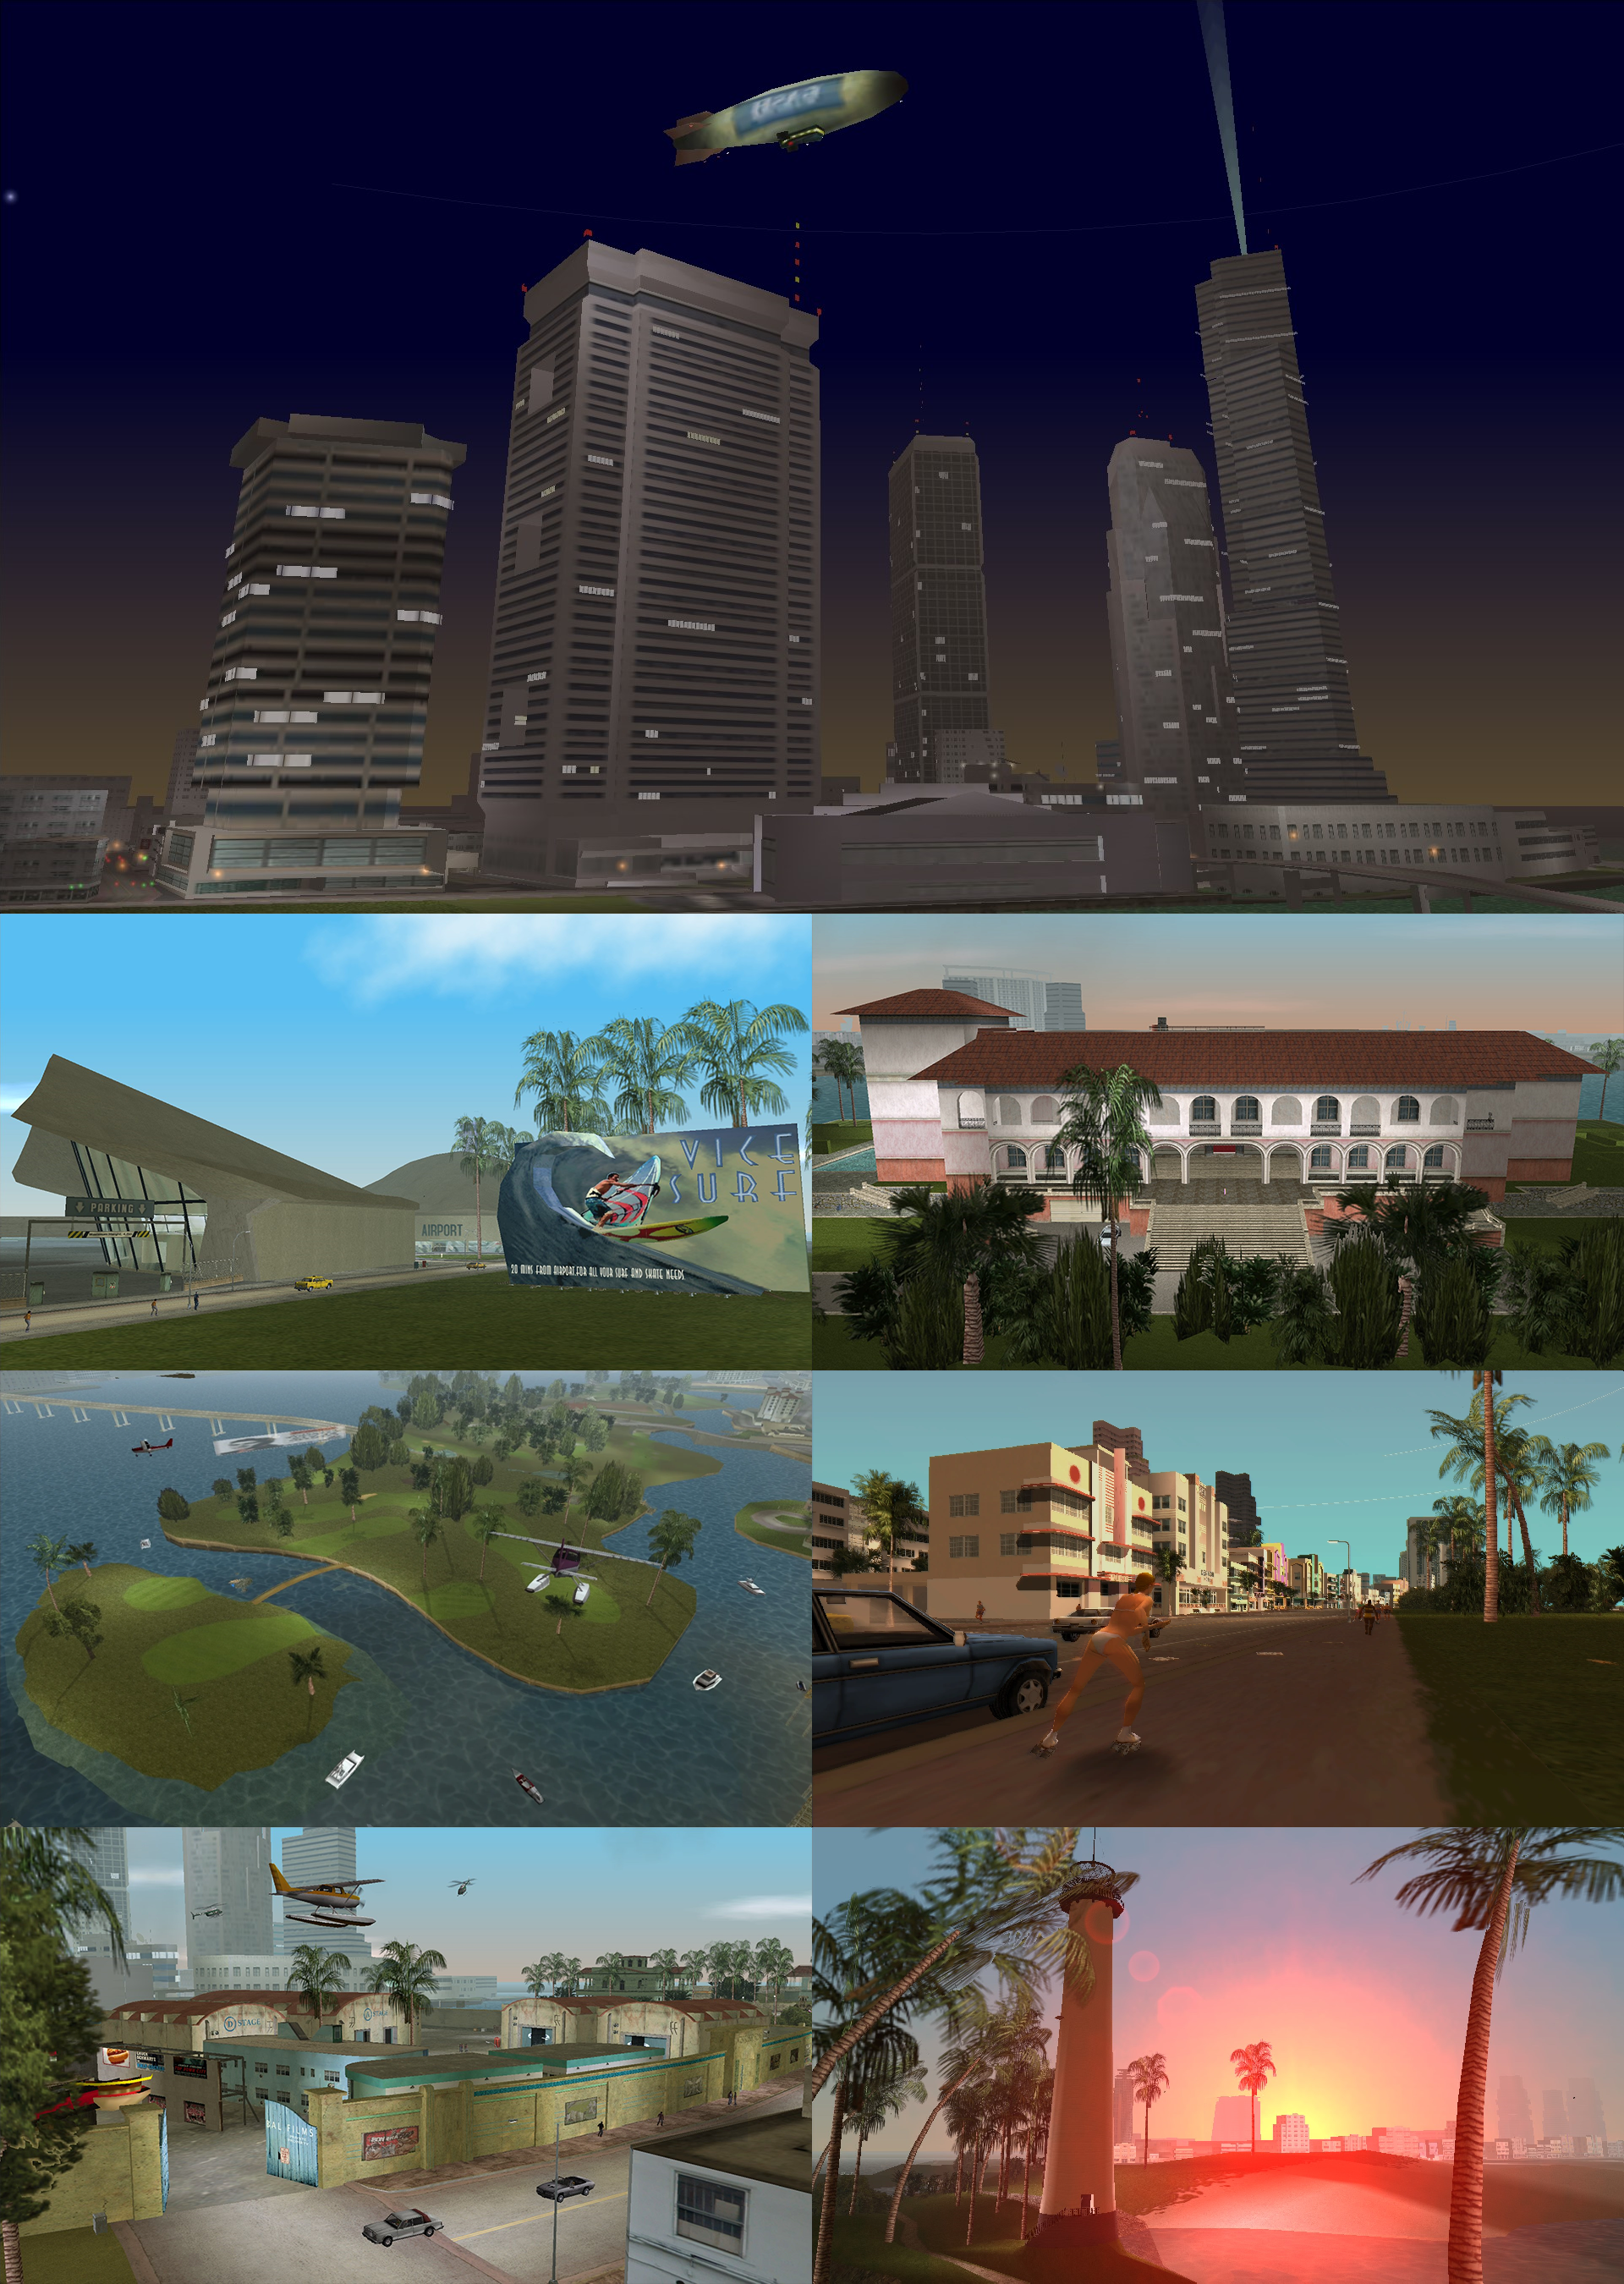 Map of GTA VI. Reimagined Vice City, huge area - Maps on the Web